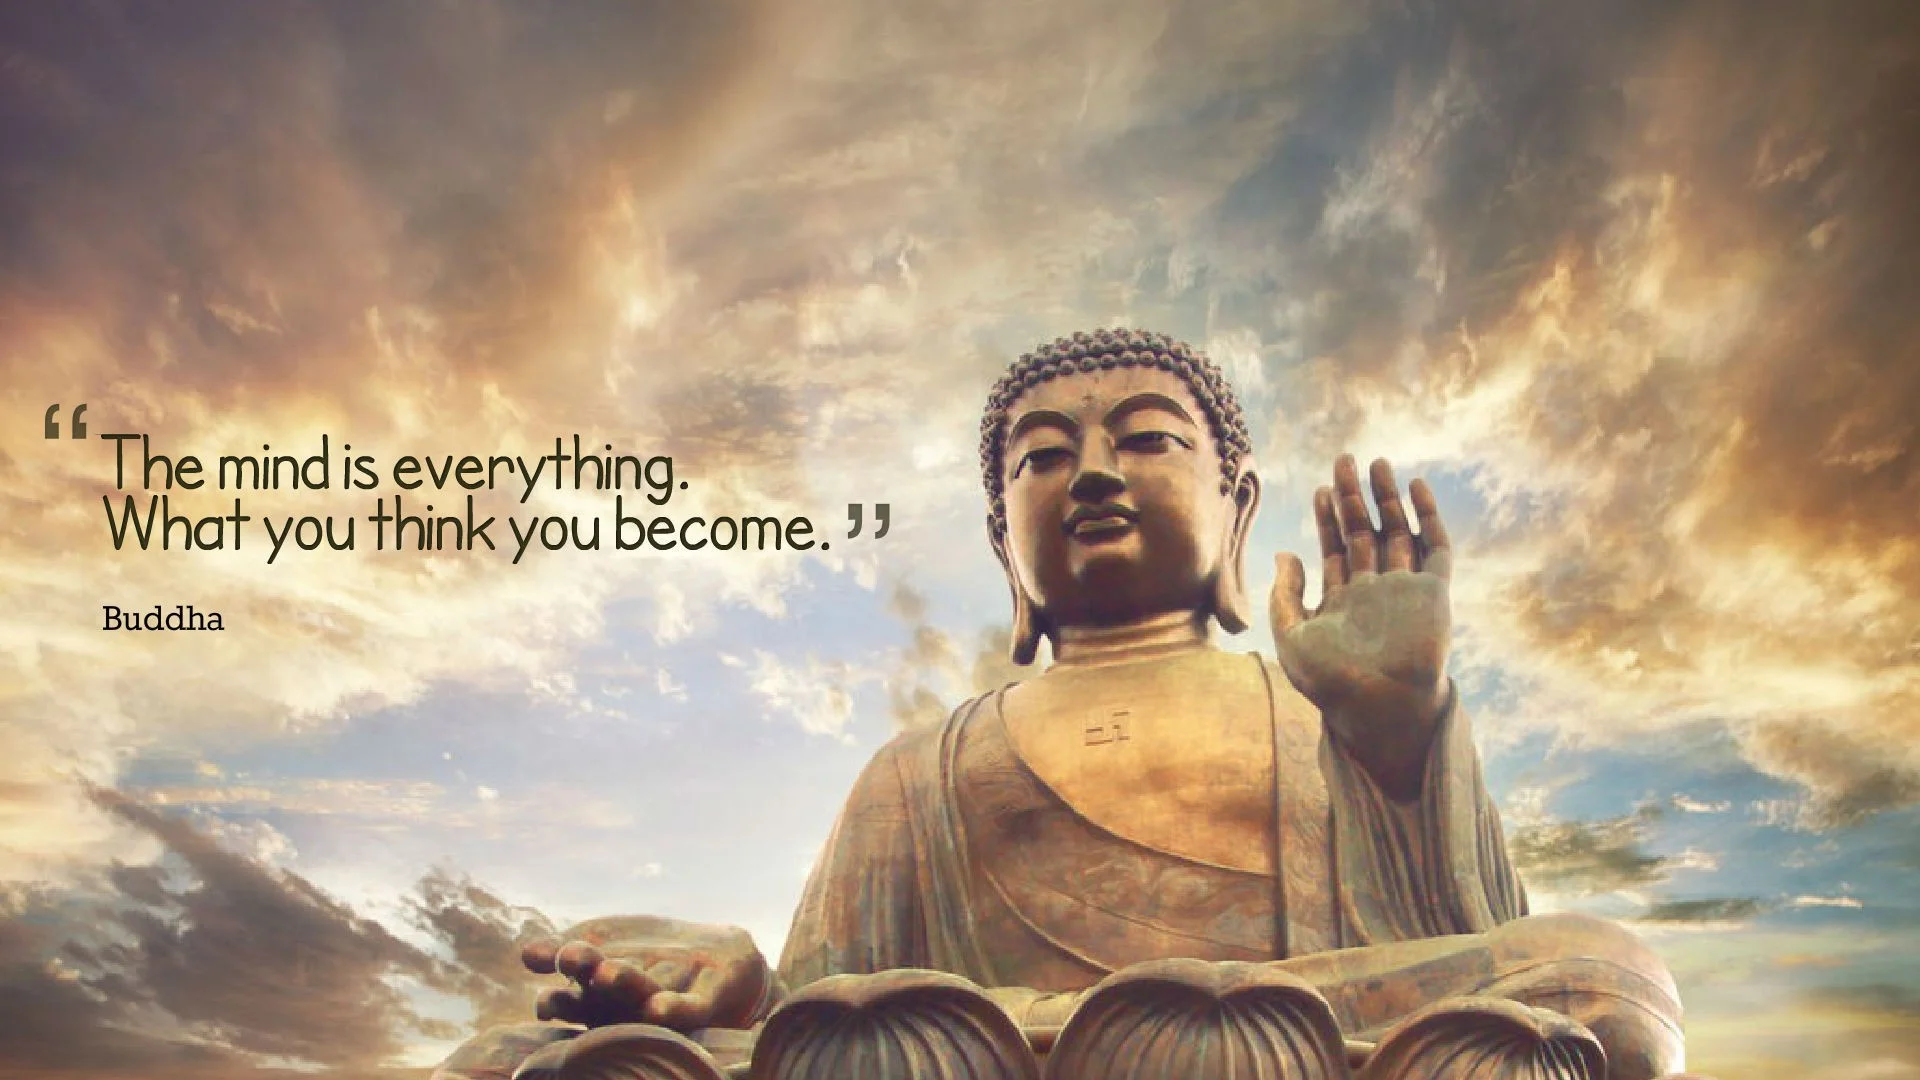 20 Greatest 4k wallpaper buddha You Can Use It For Free - Aesthetic Arena